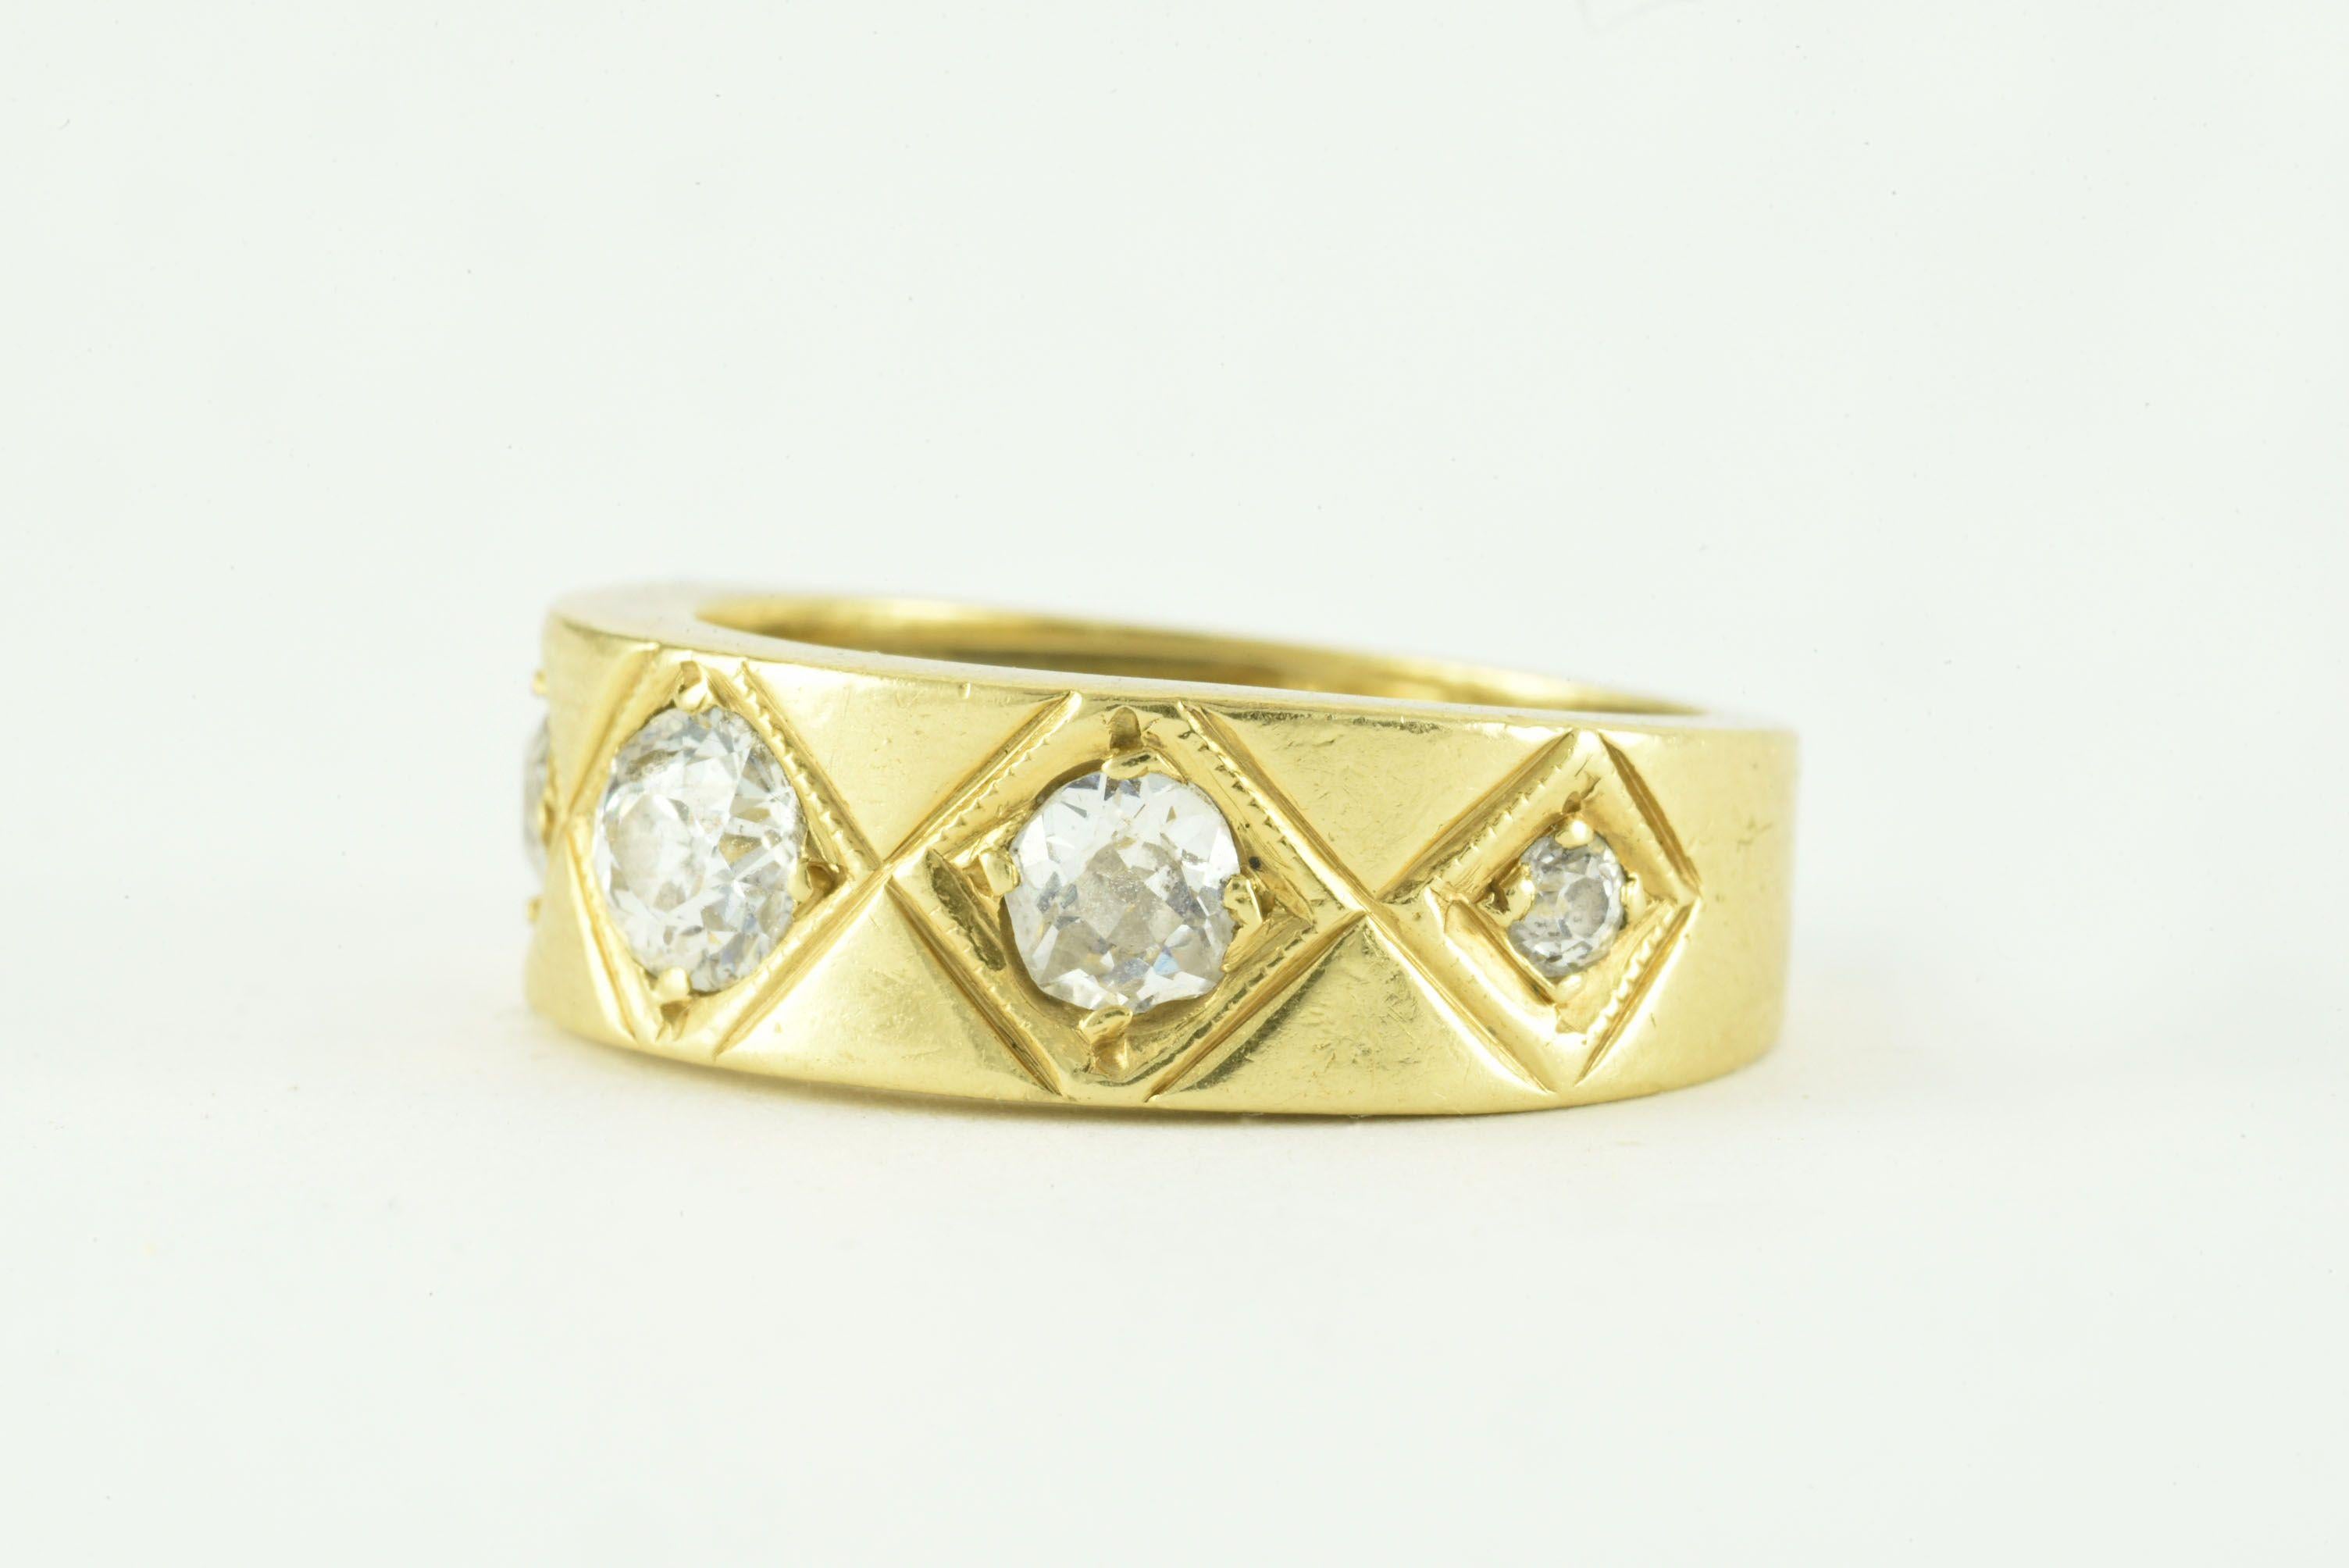 Five Old Mine cut diamonds totaling approximately 0.60 carats, H color, SI2 clarity, sparkle within a gipsy setting and framed by engraved diamond-shaped patterns and delicate milgrain atop a bold and substantial 18kt yellow gold band. 
